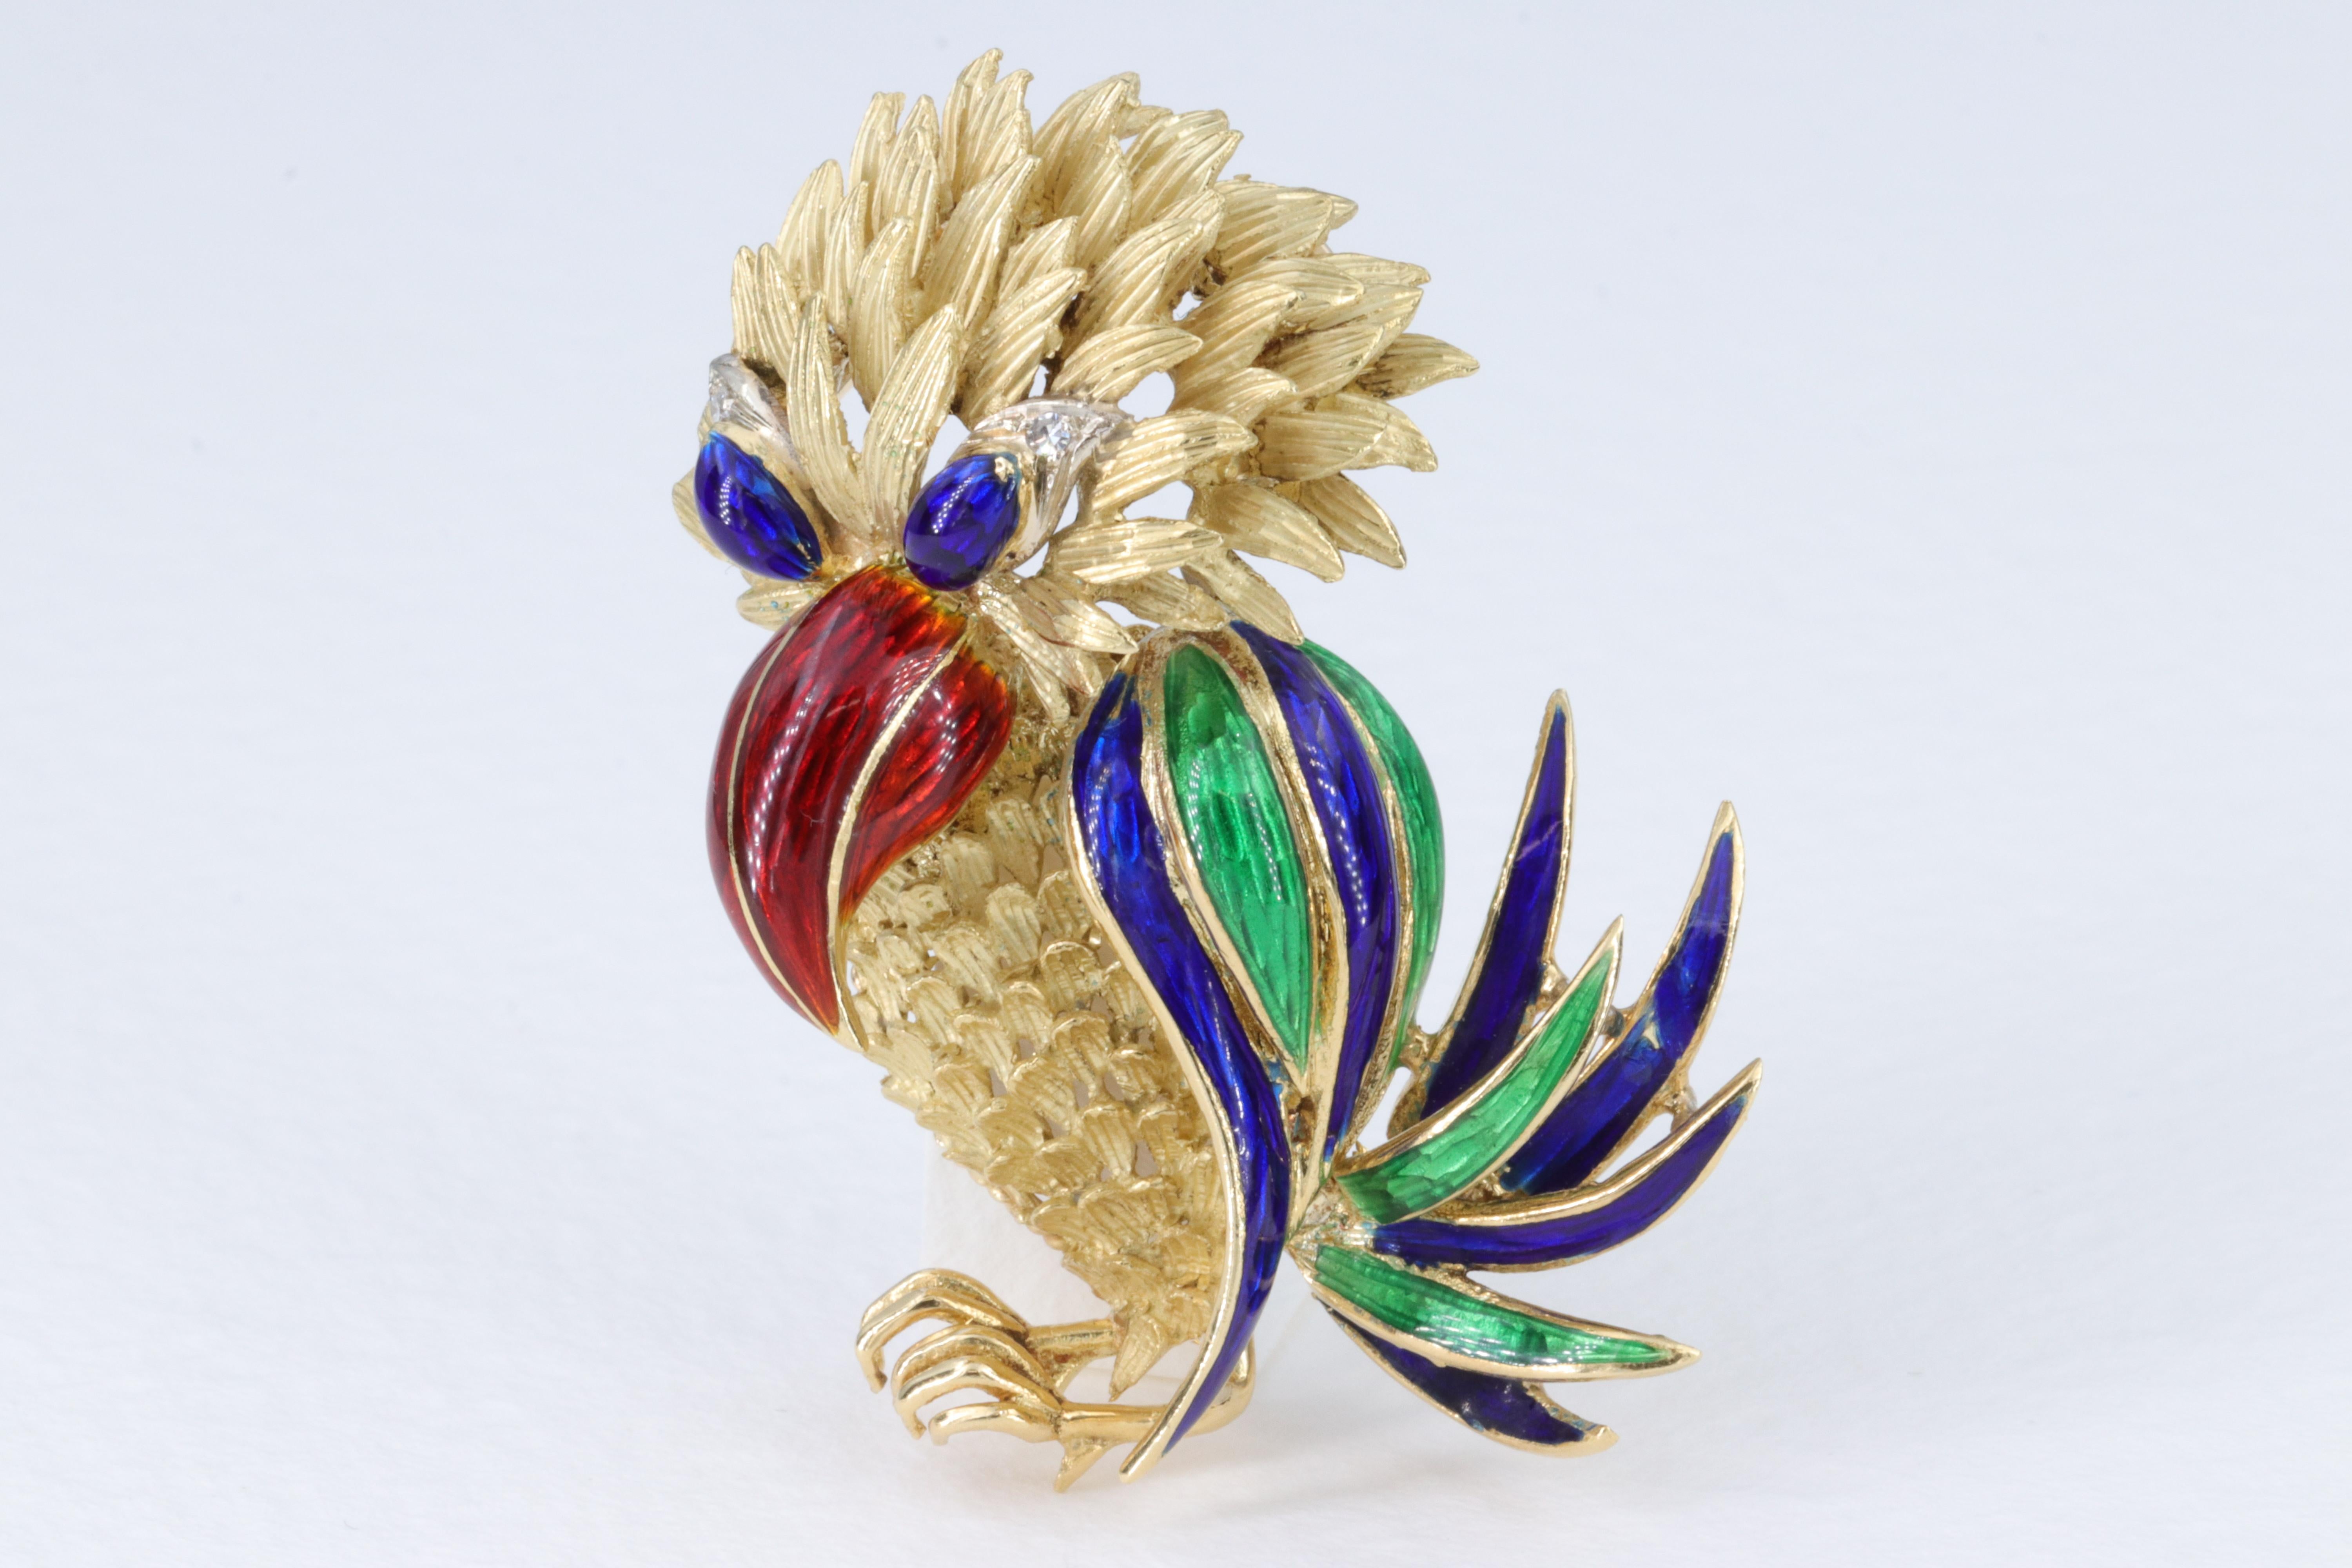 This cute mid century parrot / bird pendant is crafted of 18 karat yellow gold, diamonds and blue and green hand done enamel and is fashioned with two large eyelets / loops to easily slide on and off most chains. The openings are 4 millimeters each.